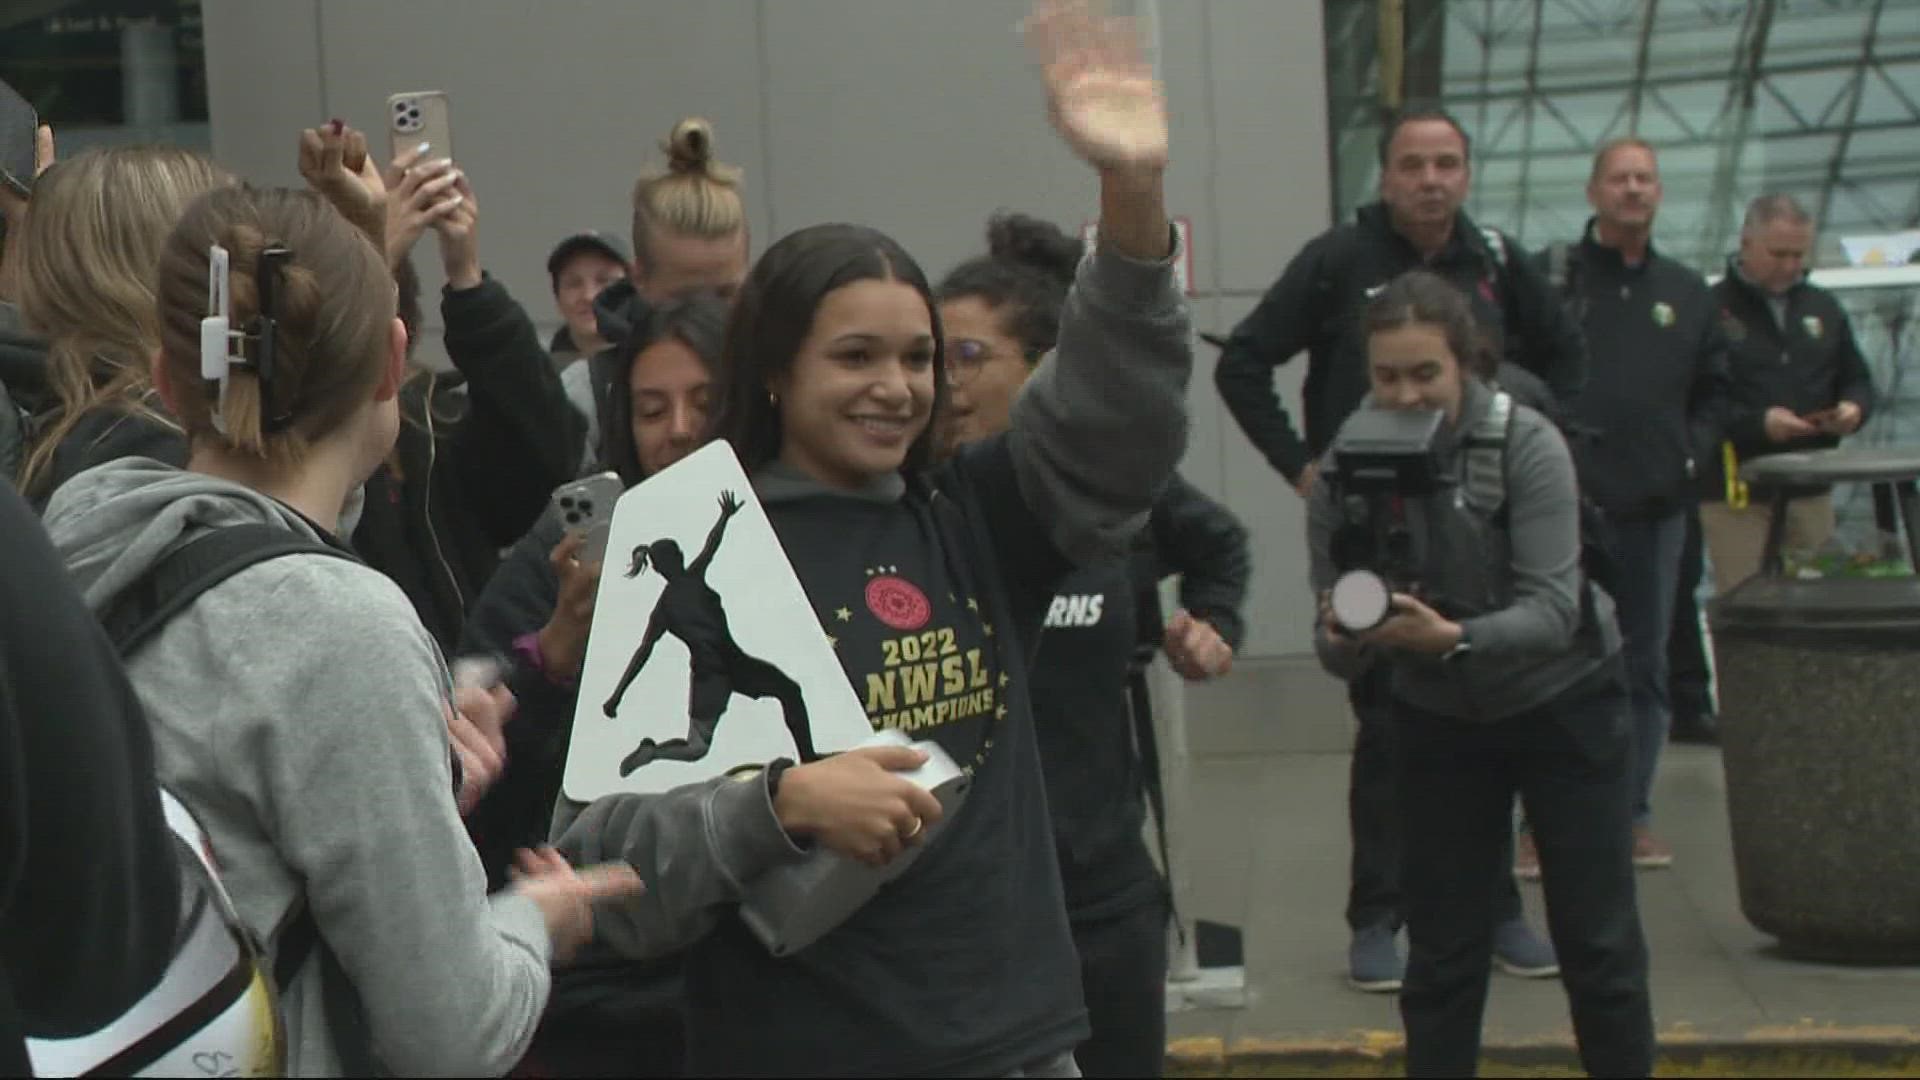 Fans gathered at Portland International Airport on Oct. 30 to celebrate the Thorns after their NWSL championship victory. They beat the Kansas City Current 2-0.